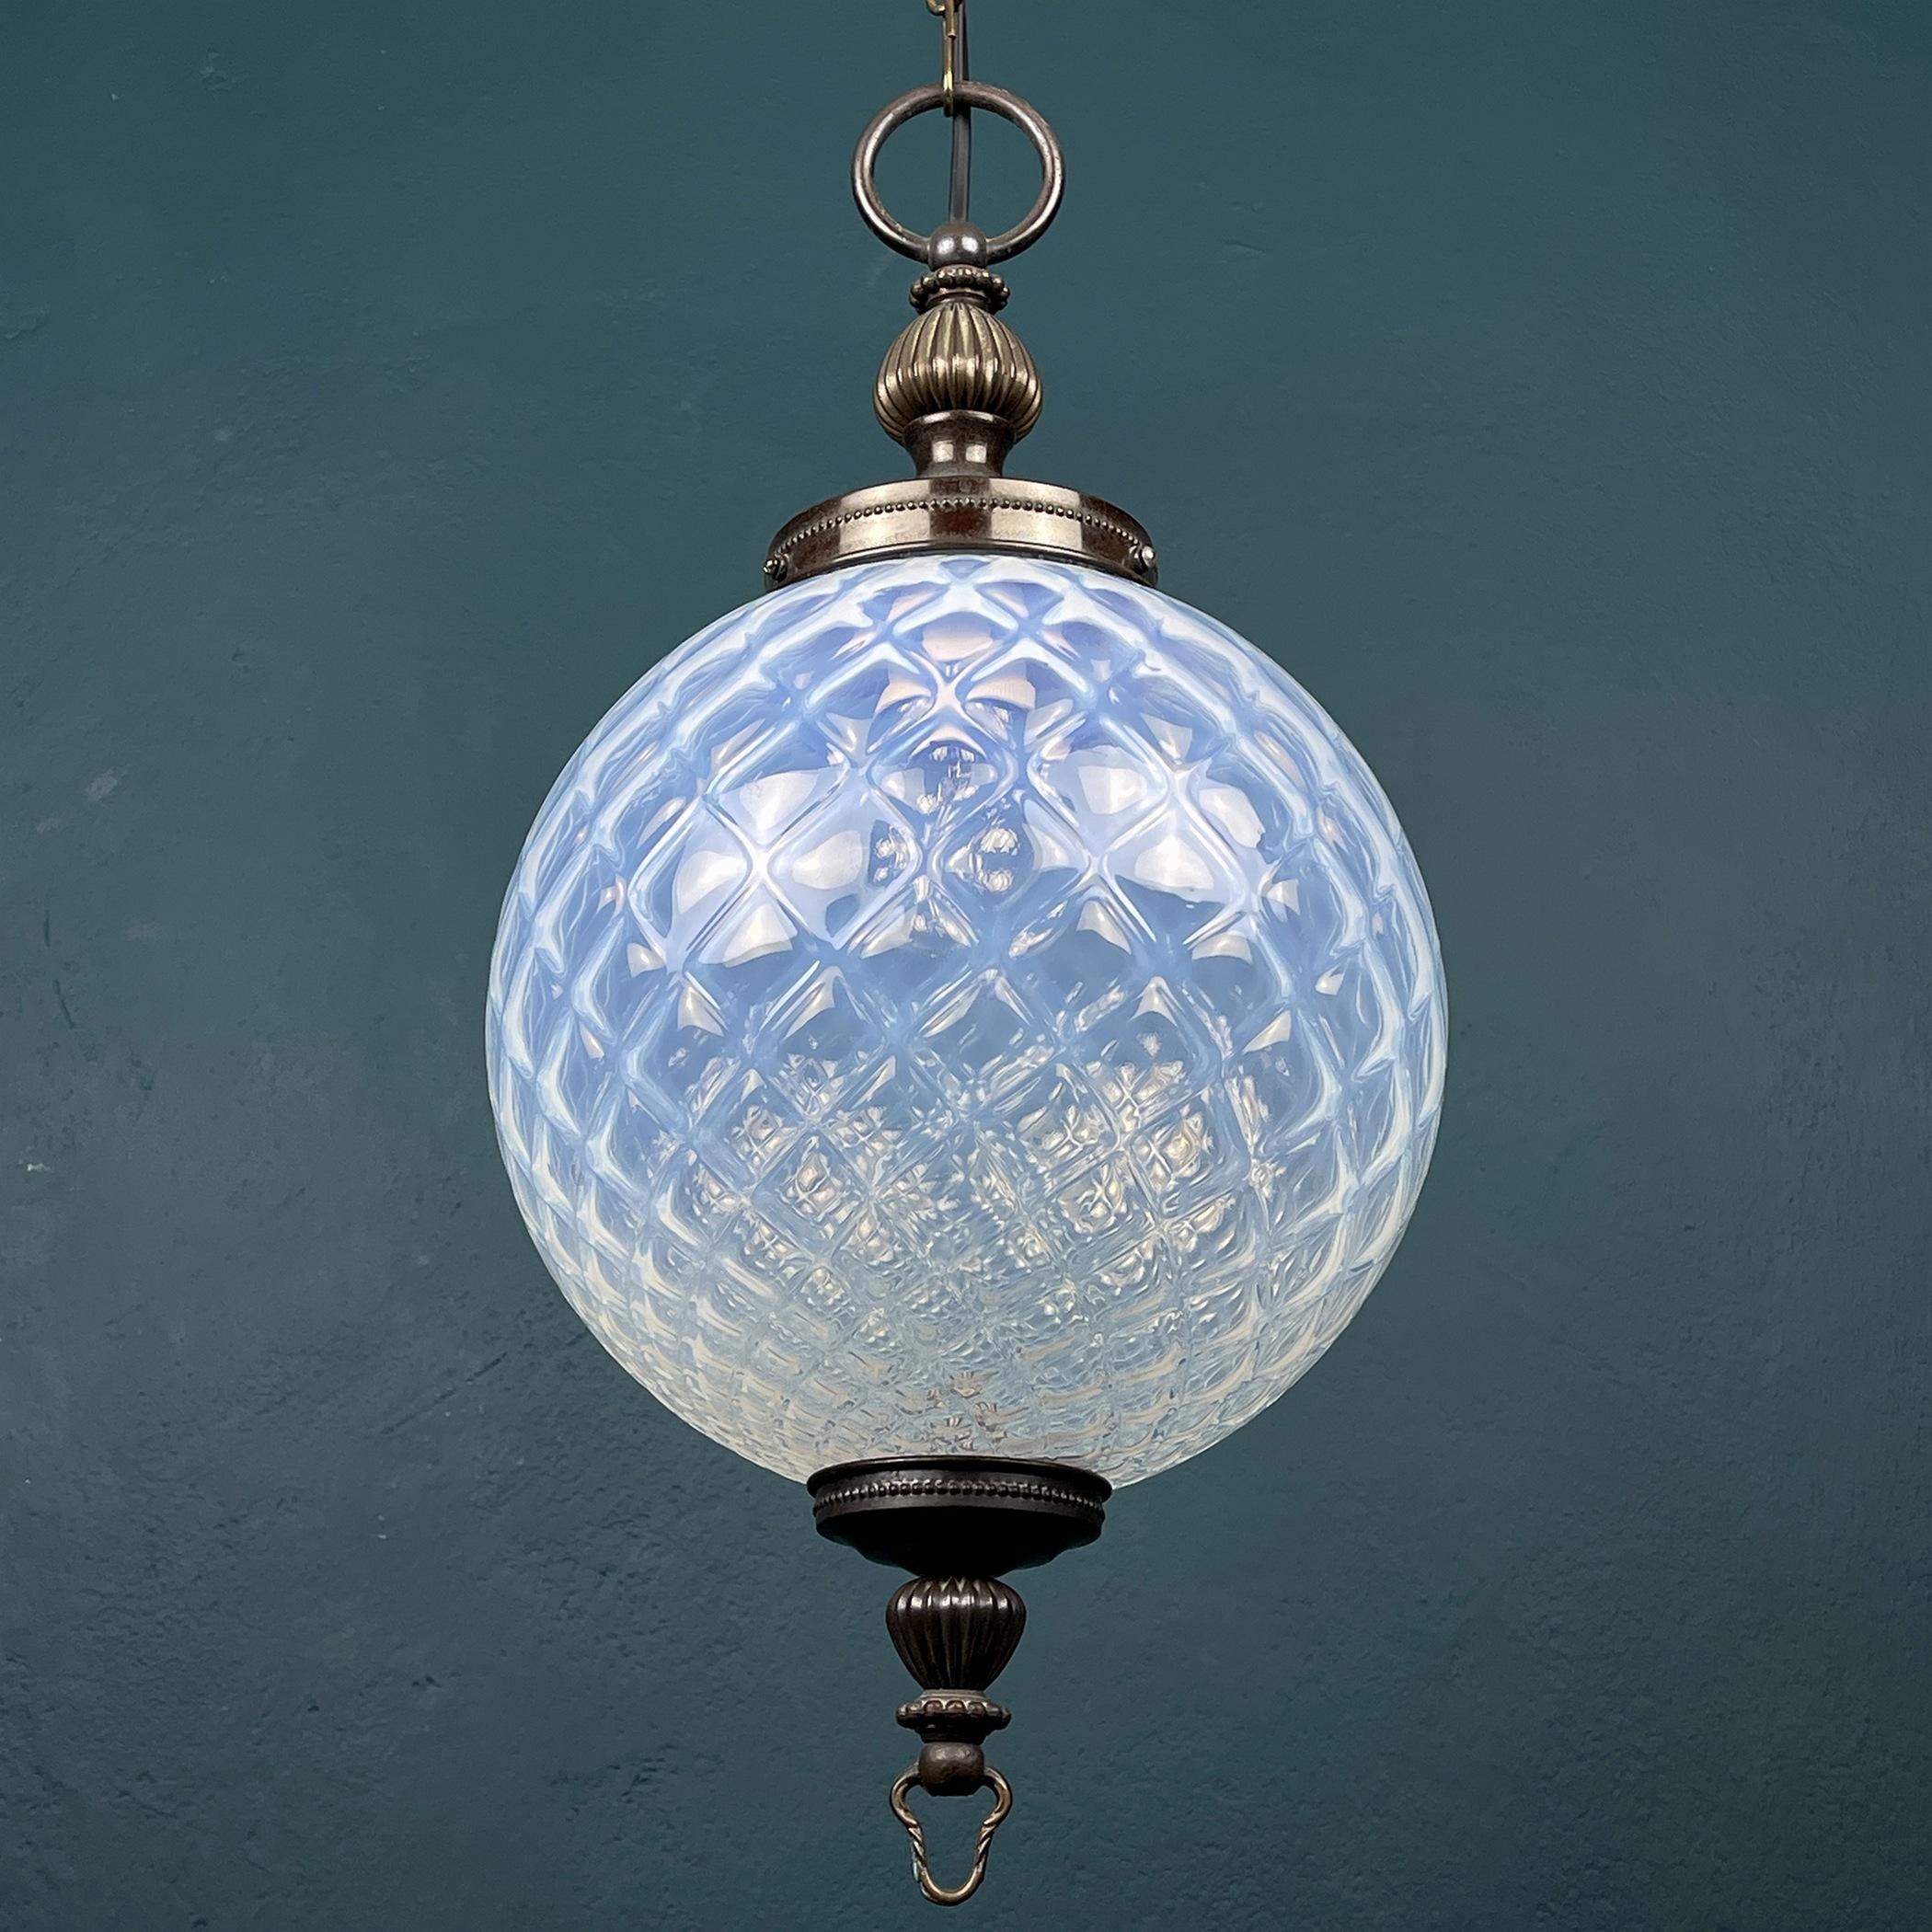 Vintage blue murano ball pendant lamp made in Italy in the 1970s. It gives off soft and soothing light when lit and brightens the room beautifully. It will undoubtedly decorate your home. In very good vintage condition, no damage. Requires E27